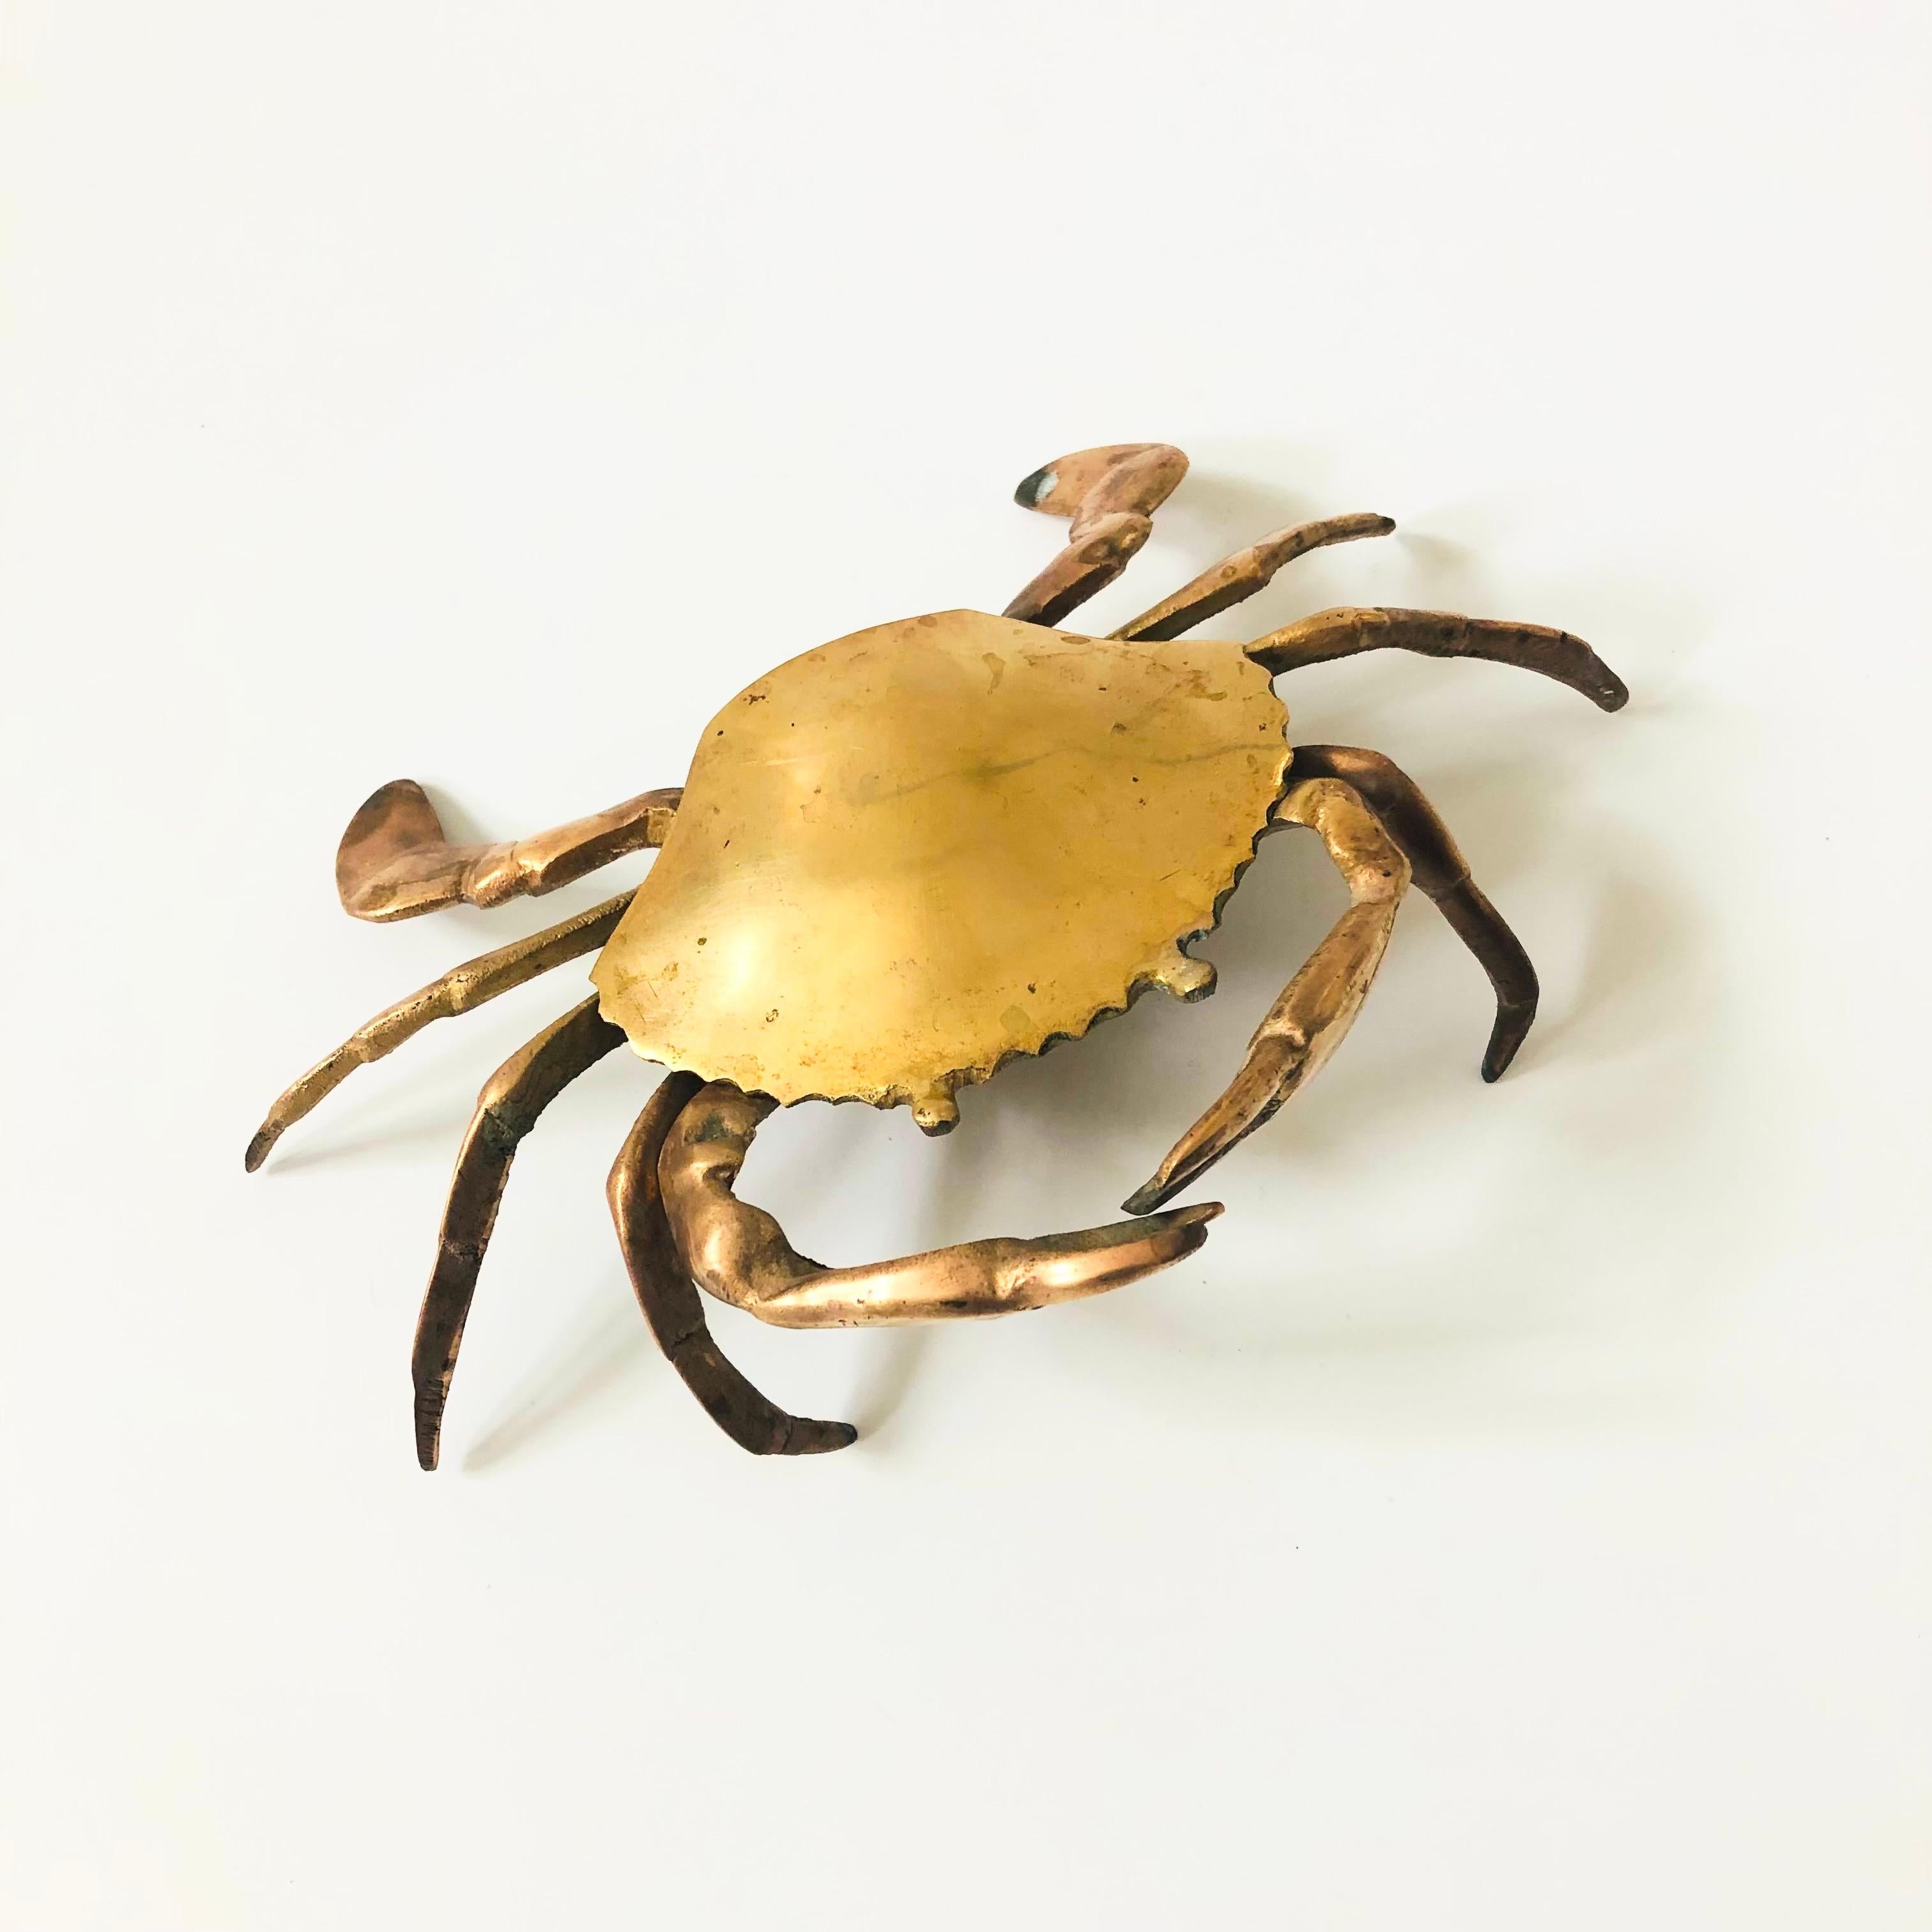 A vintage brass box in the shape of a crab. The top hinges open to reveal a small compartment in the center for storing small items. Beautiful detailing formed into the brass to create the crab's features.

